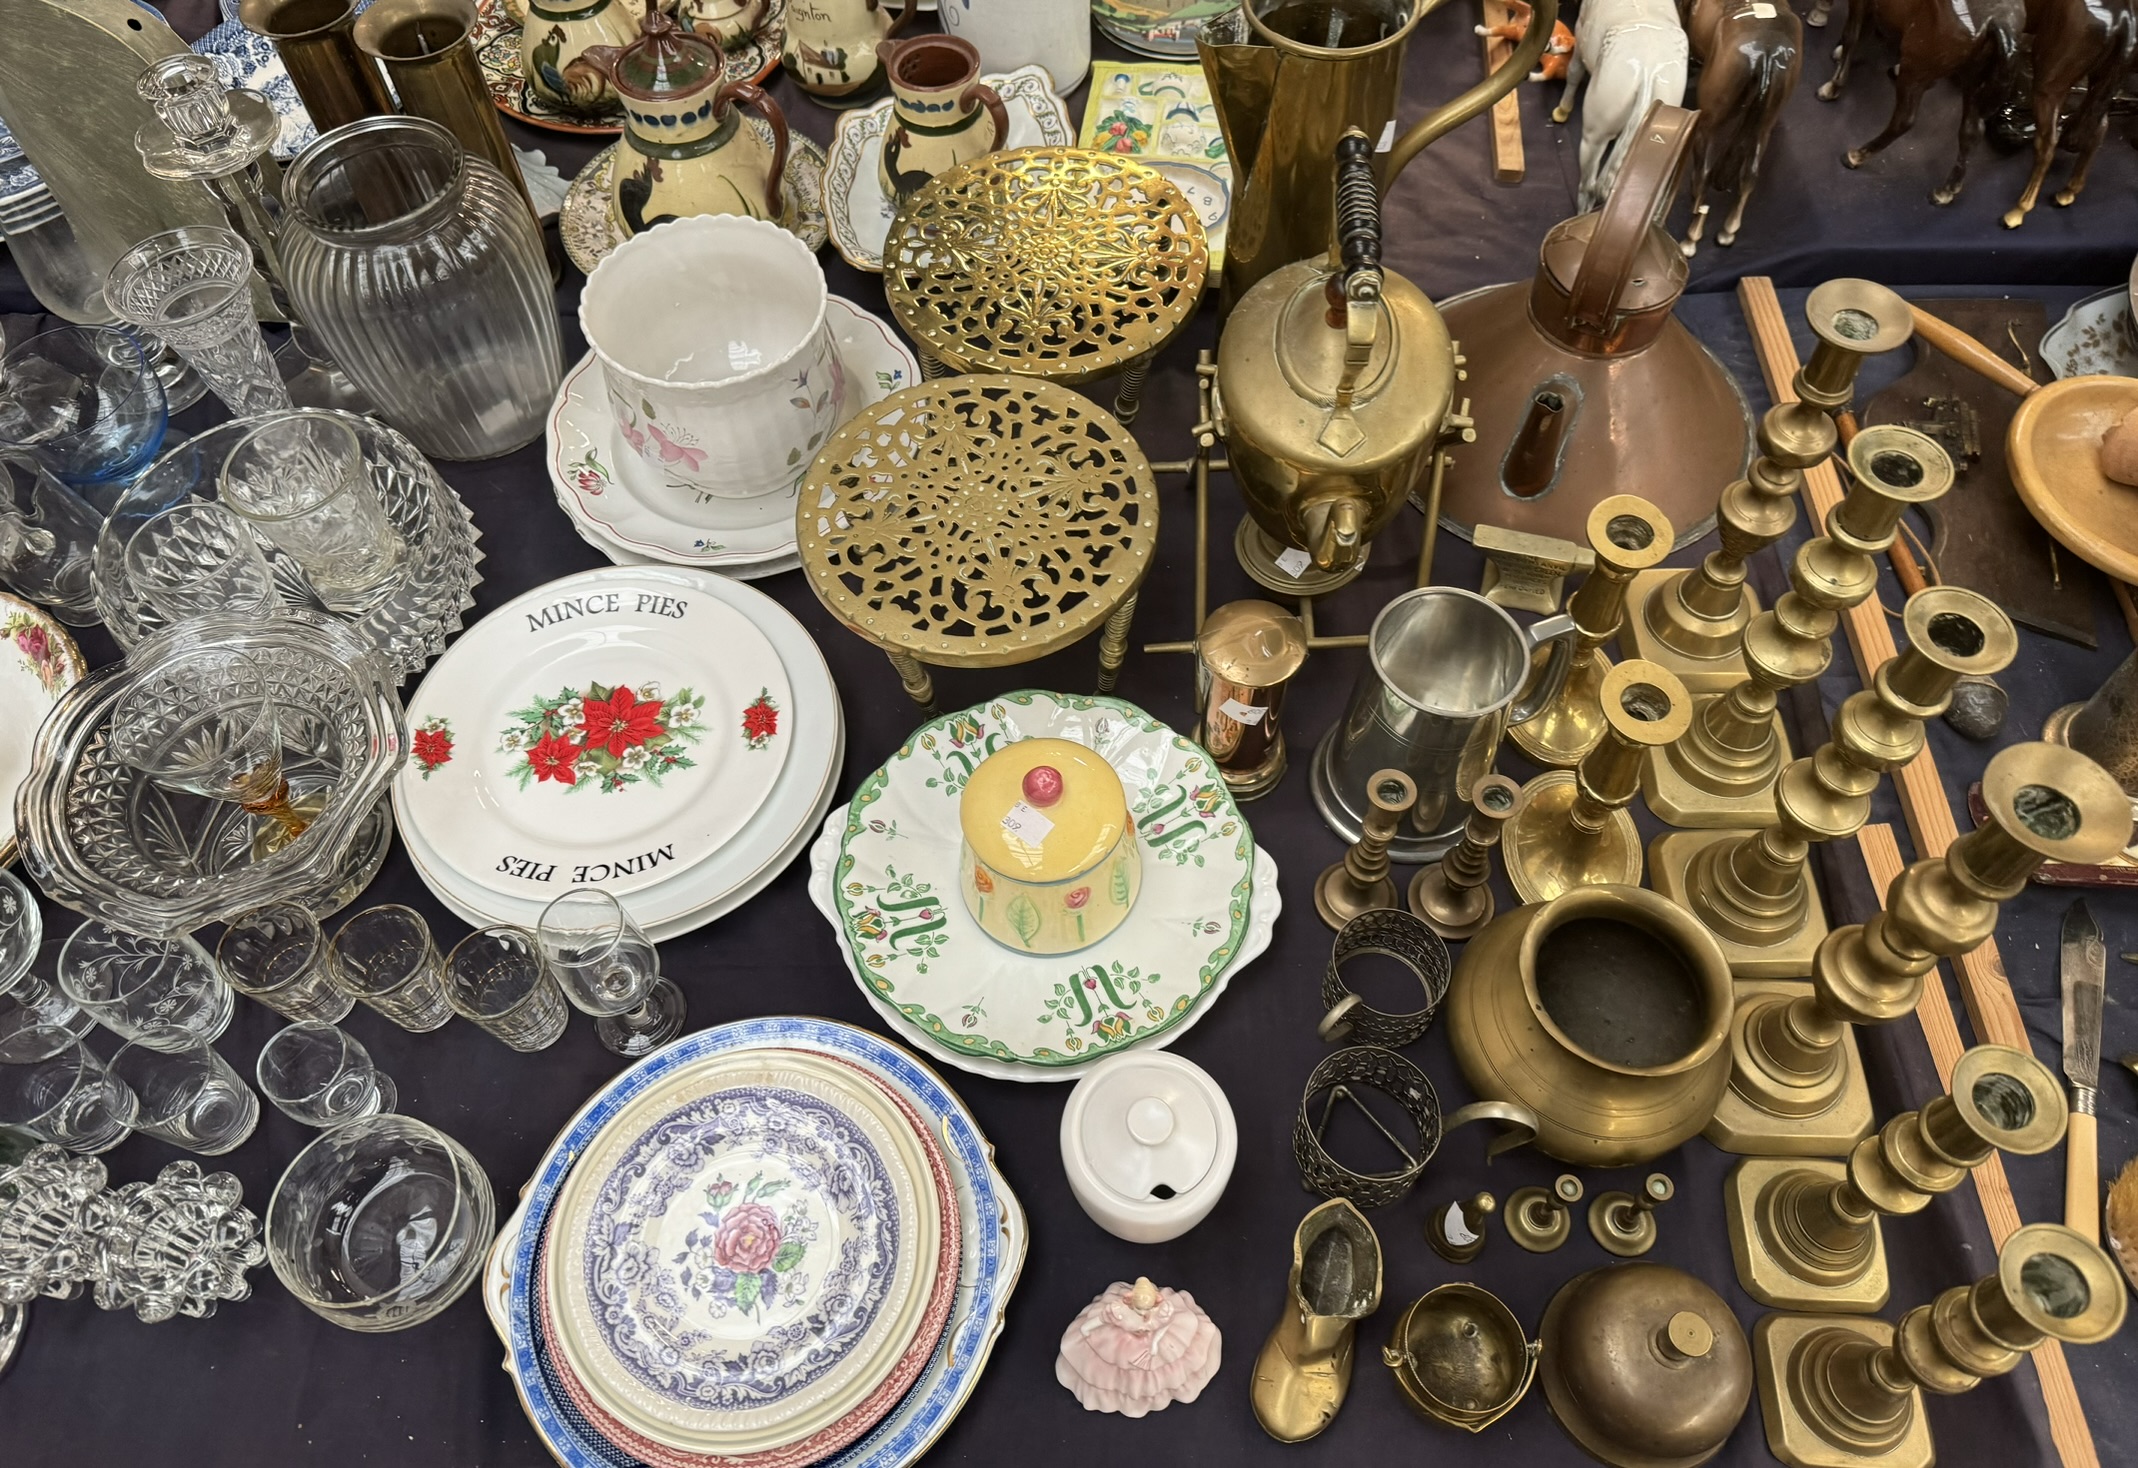 An extensive lot including drinking glasses, glass bowls, glass jugs, pottery plates, - Image 4 of 4